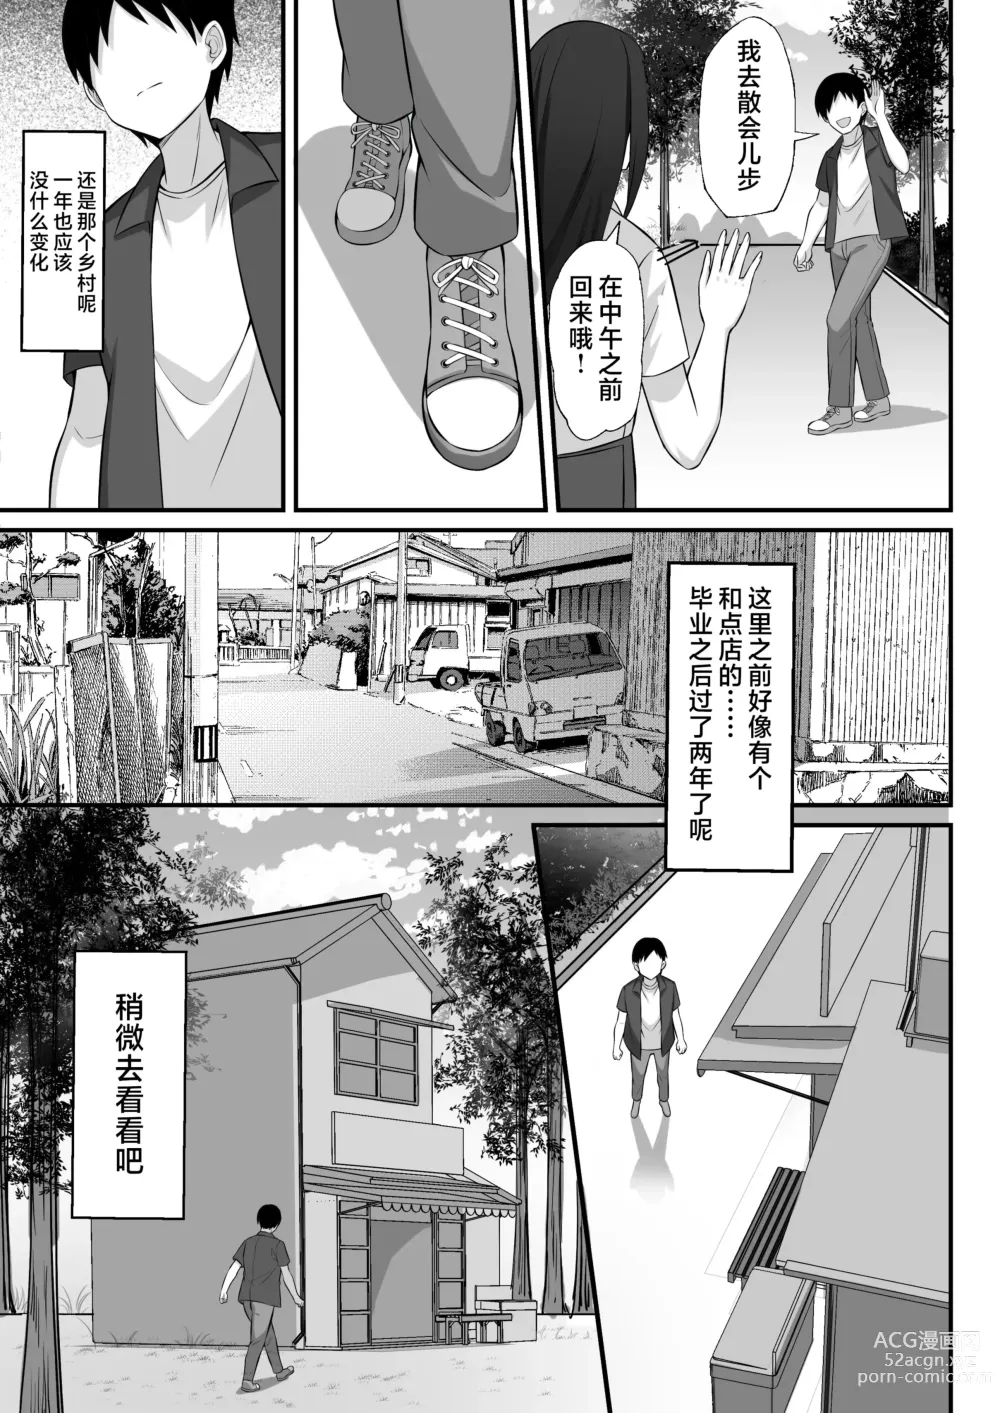 Page 6 of doujinshi 我的上京性生活12 